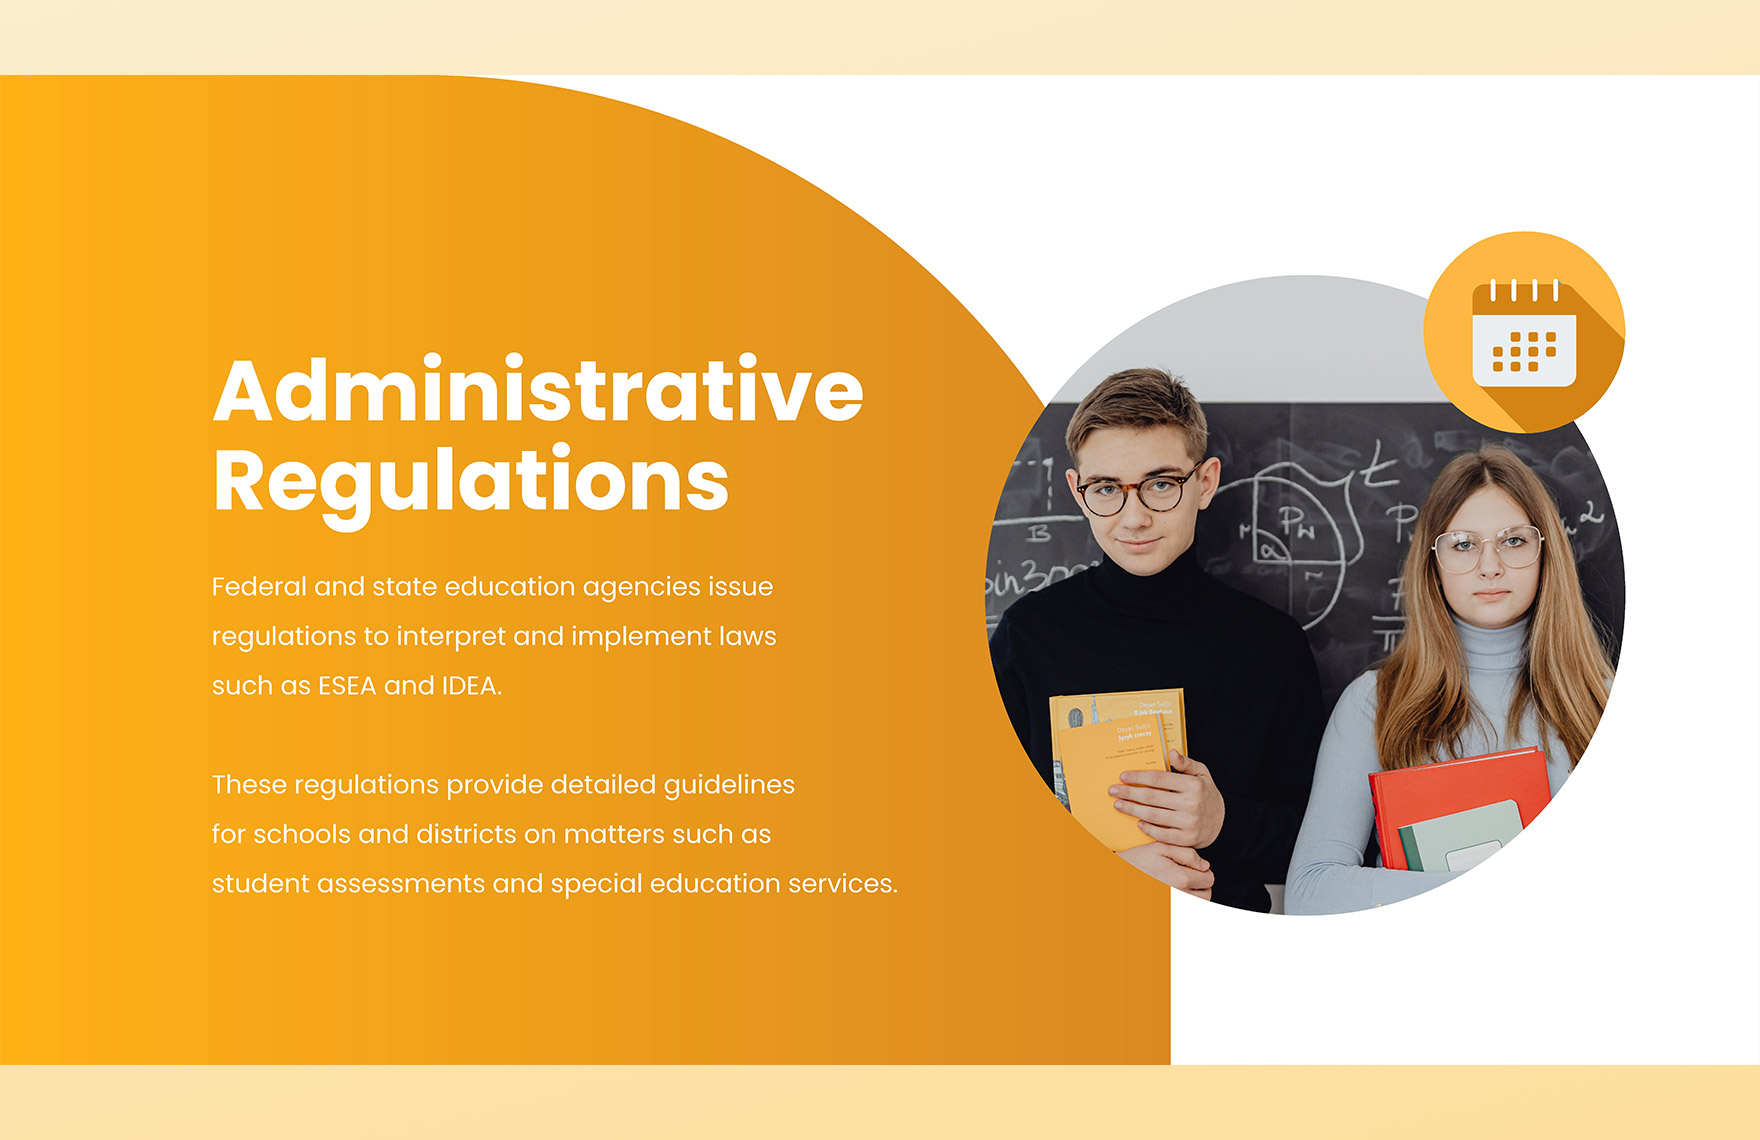 Legal Bases of School Administration and Supervision PPT Template